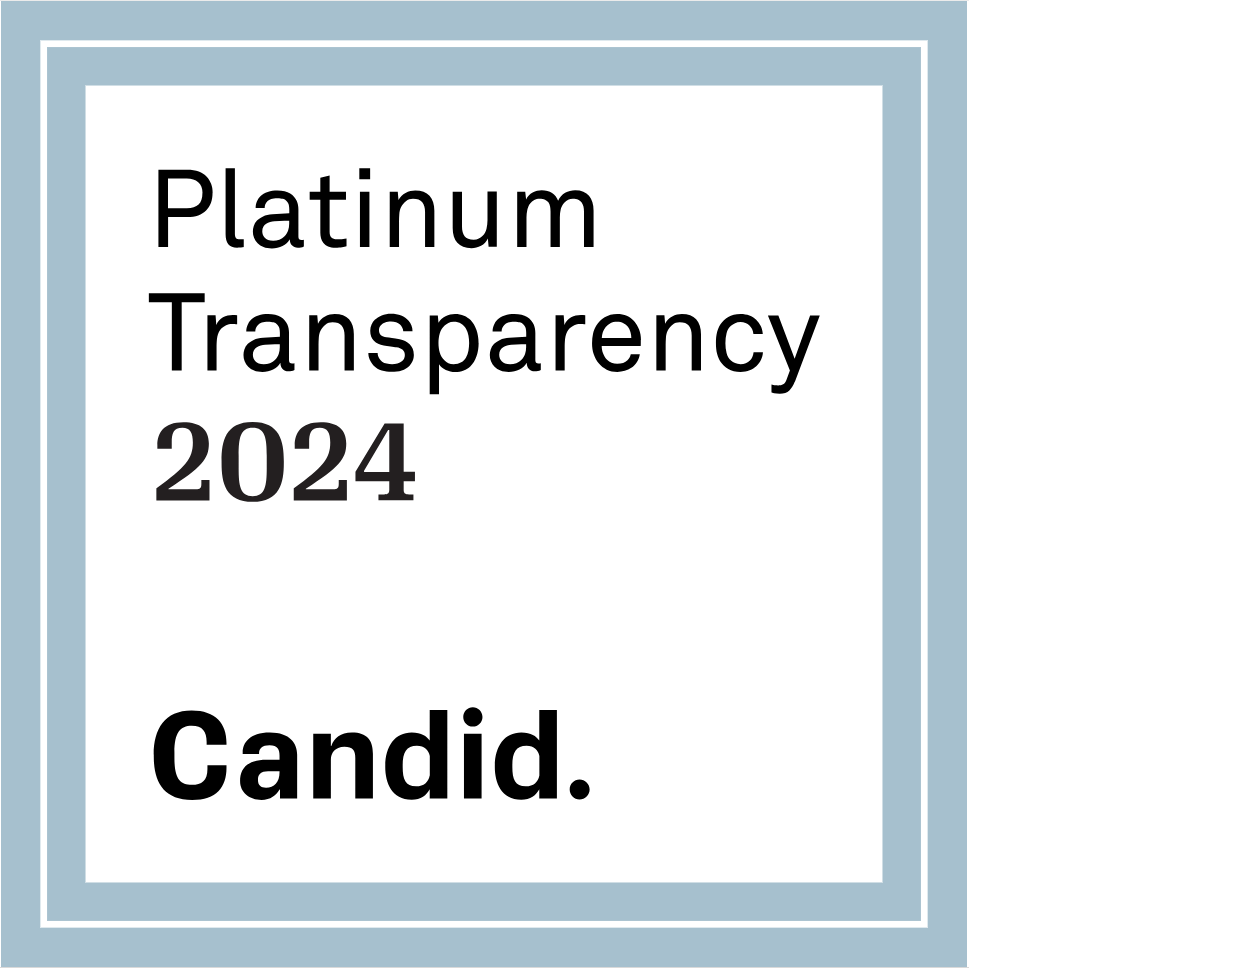  A square badge with a light blue border surrounds the words “Platinum Transparency 2024. Candid.”  